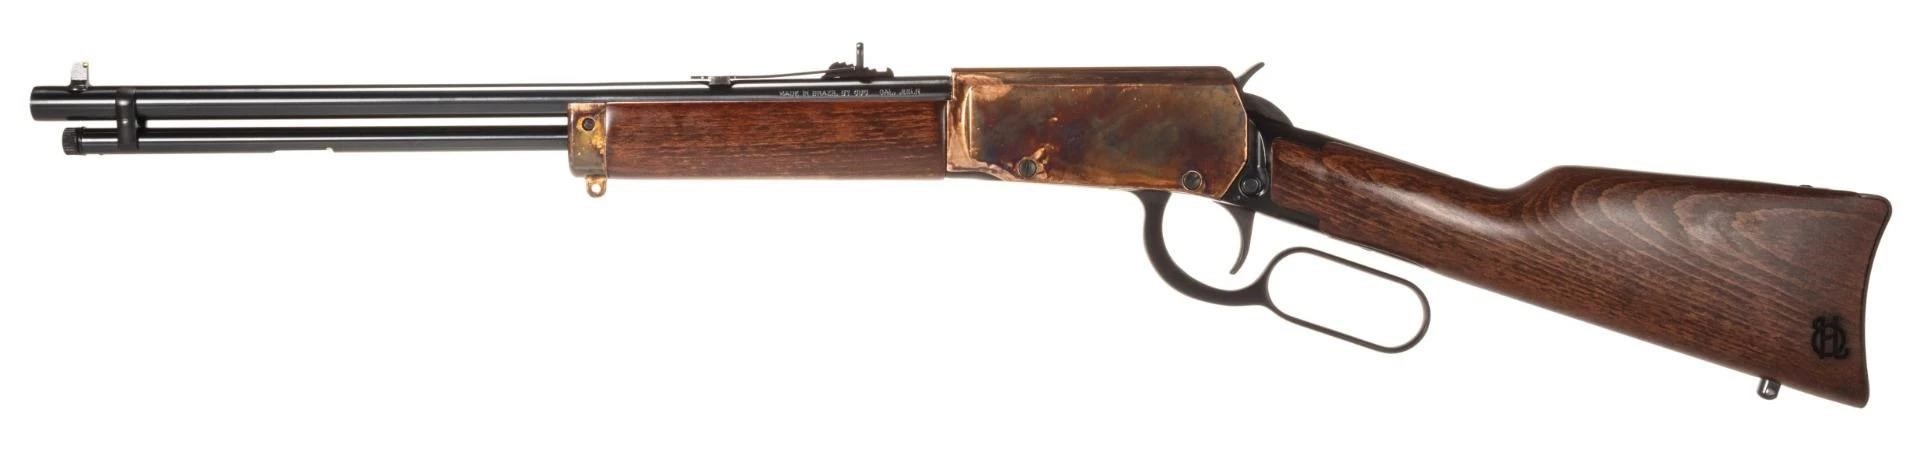 Heritage Settler Compact Rifle - Color Case Harden